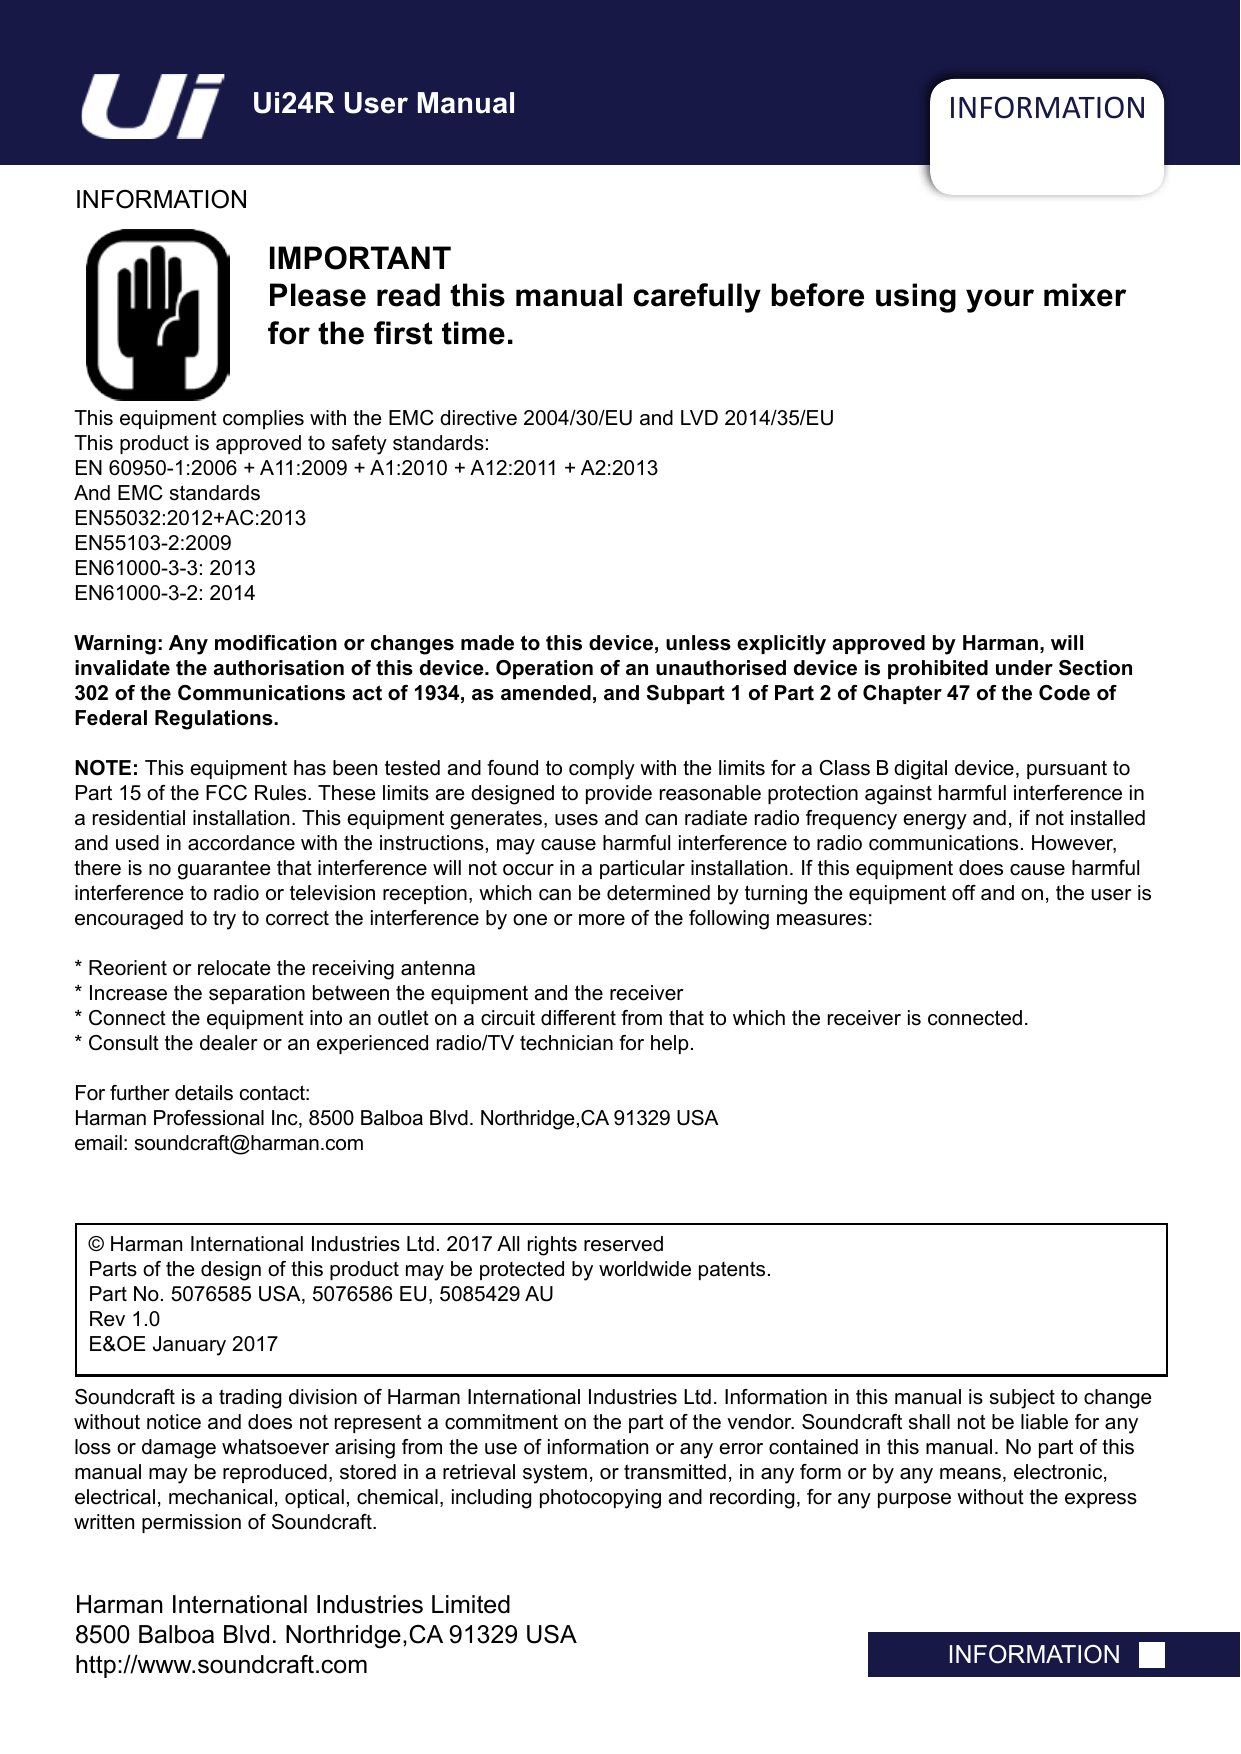 INFORMATIONINFORMATIONINFORMATIONIMPORTANTPlease read this manual carefully before using your mixer for the rst time.This equipment complies with the EMC directive 2004/30/EU and LVD 2014/35/EUThis product is approved to safety standards:EN 60950-1:2006 + A11:2009 + A1:2010 + A12:2011 + A2:2013And EMC standardsEN55032:2012+AC:2013EN55103-2:2009EN61000-3-3: 2013EN61000-3-2: 2014Warning: Any modication or changes made to this device, unless explicitly approved by Harman, will  invalidate the authorisation of this device. Operation of an unauthorised device is prohibited under Section 302 of the Communications act of 1934, as amended, and Subpart 1 of Part 2 of Chapter 47 of the Code of Federal Regulations.NOTE: This equipment has been tested and found to comply with the limits for a Class B digital device, pursuant to Part 15 of the FCC Rules. These limits are designed to provide reasonable protection against harmful interference in a residential installation. This equipment generates, uses and can radiate radio frequency energy and, if not installed and used in accordance with the instructions, may cause harmful interference to radio communications. However, there is no guarantee that interference will not occur in a particular installation. If this equipment does cause harmful interference to radio or television reception, which can be determined by turning the equipment off and on, the user is encouraged to try to correct the interference by one or more of the following measures:* Reorient or relocate the receiving antenna* Increase the separation between the equipment and the receiver* Connect the equipment into an outlet on a circuit different from that to which the receiver is connected.* Consult the dealer or an experienced radio/TV technician for help.For further details contact: Harman Professional Inc, 8500 Balboa Blvd. Northridge,CA 91329 USAemail: soundcraft@harman.com© Harman International Industries Ltd. 2017 All rights reservedParts of the design of this product may be protected by worldwide patents.Part No. 5076585 USA, 5076586 EU, 5085429 AU Rev 1.0E&amp;OE January 2017Soundcraft is a trading division of Harman International Industries Ltd. Information in this manual is subject to change without notice and does not represent a commitment on the part of the vendor. Soundcraft shall not be liable for any loss or damage whatsoever arising from the use of information or any error contained in this manual. No part of this manual may be reproduced, stored in a retrieval system, or transmitted, in any form or by any means, electronic, electrical, mechanical, optical, chemical, including photocopying and recording, for any purpose without the express written permission of Soundcraft.Harman International Industries Limited8500 Balboa Blvd. Northridge,CA 91329 USAhttp://www.soundcraft.comUi24R User Manual